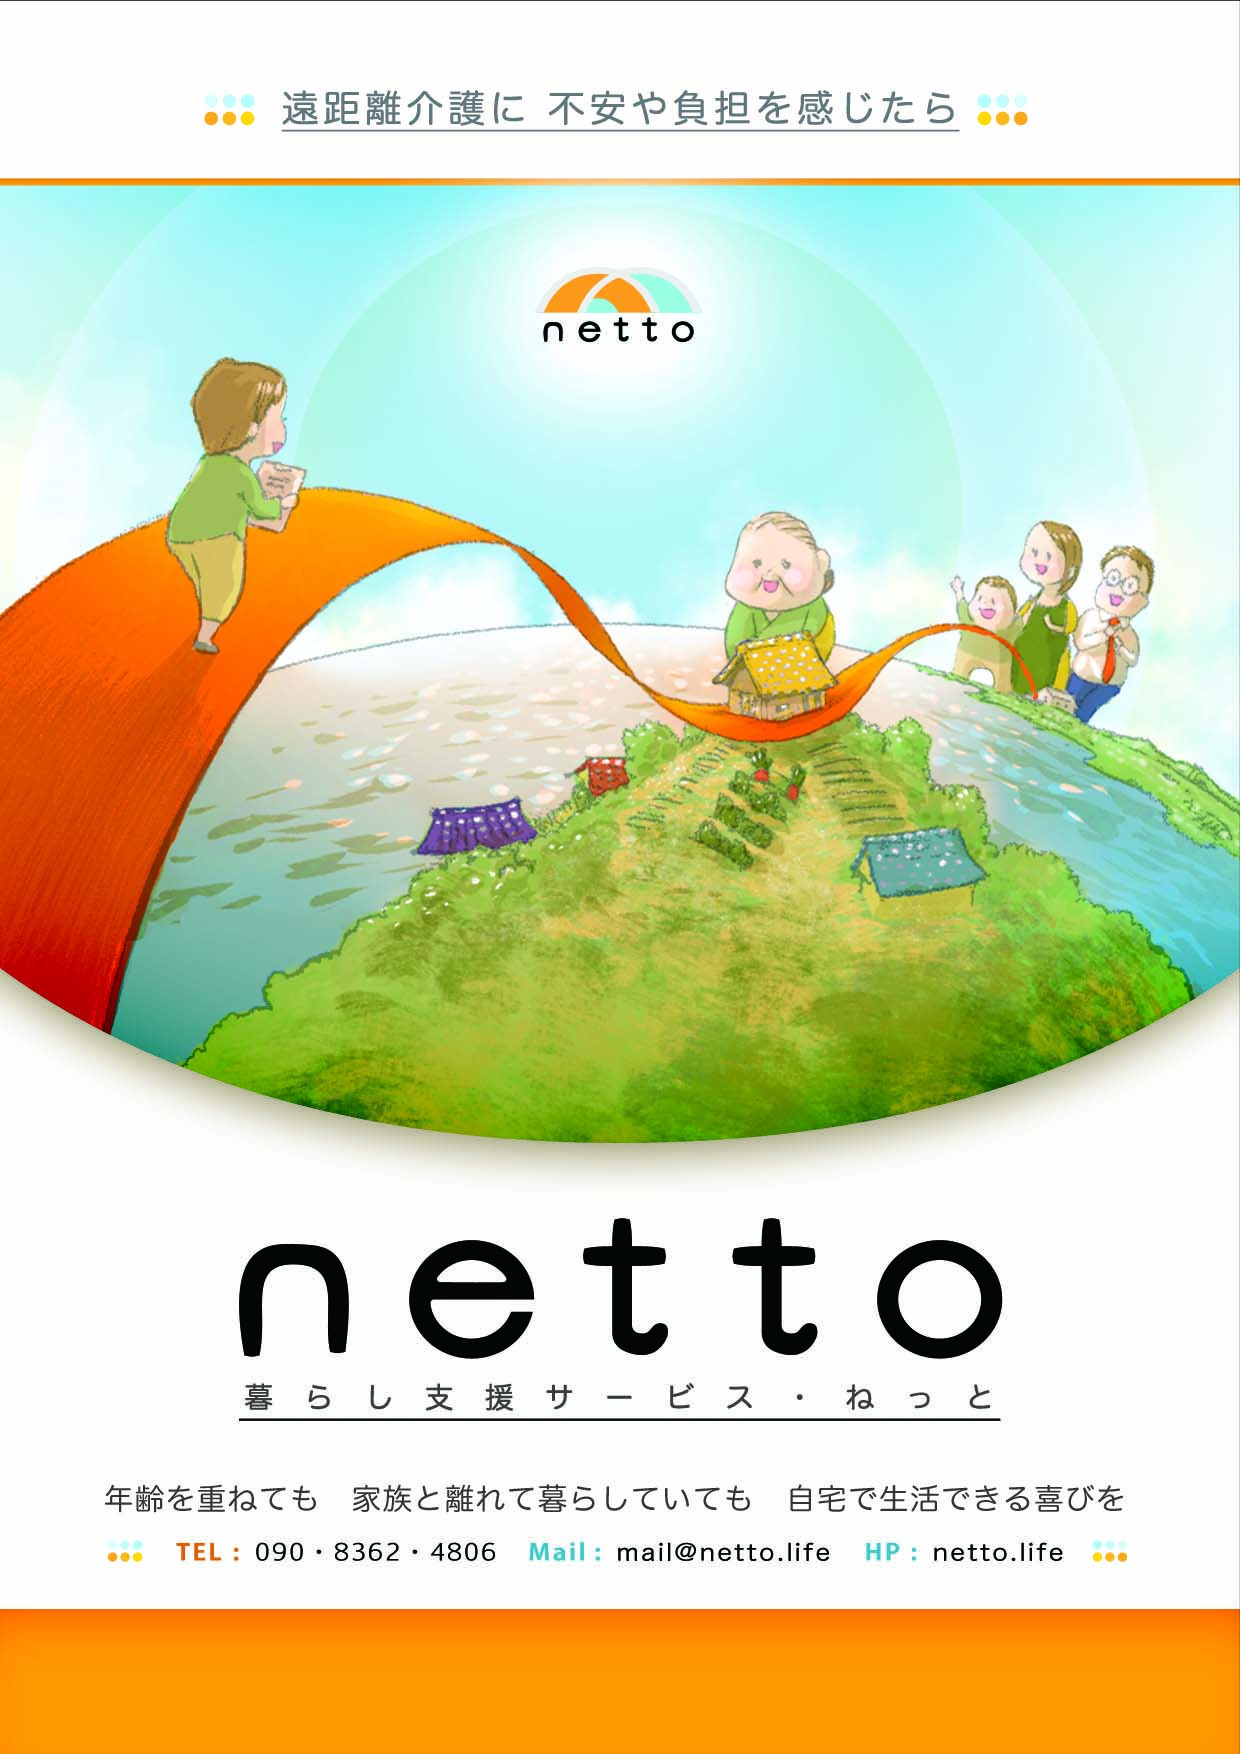 Living support service　netto（net）